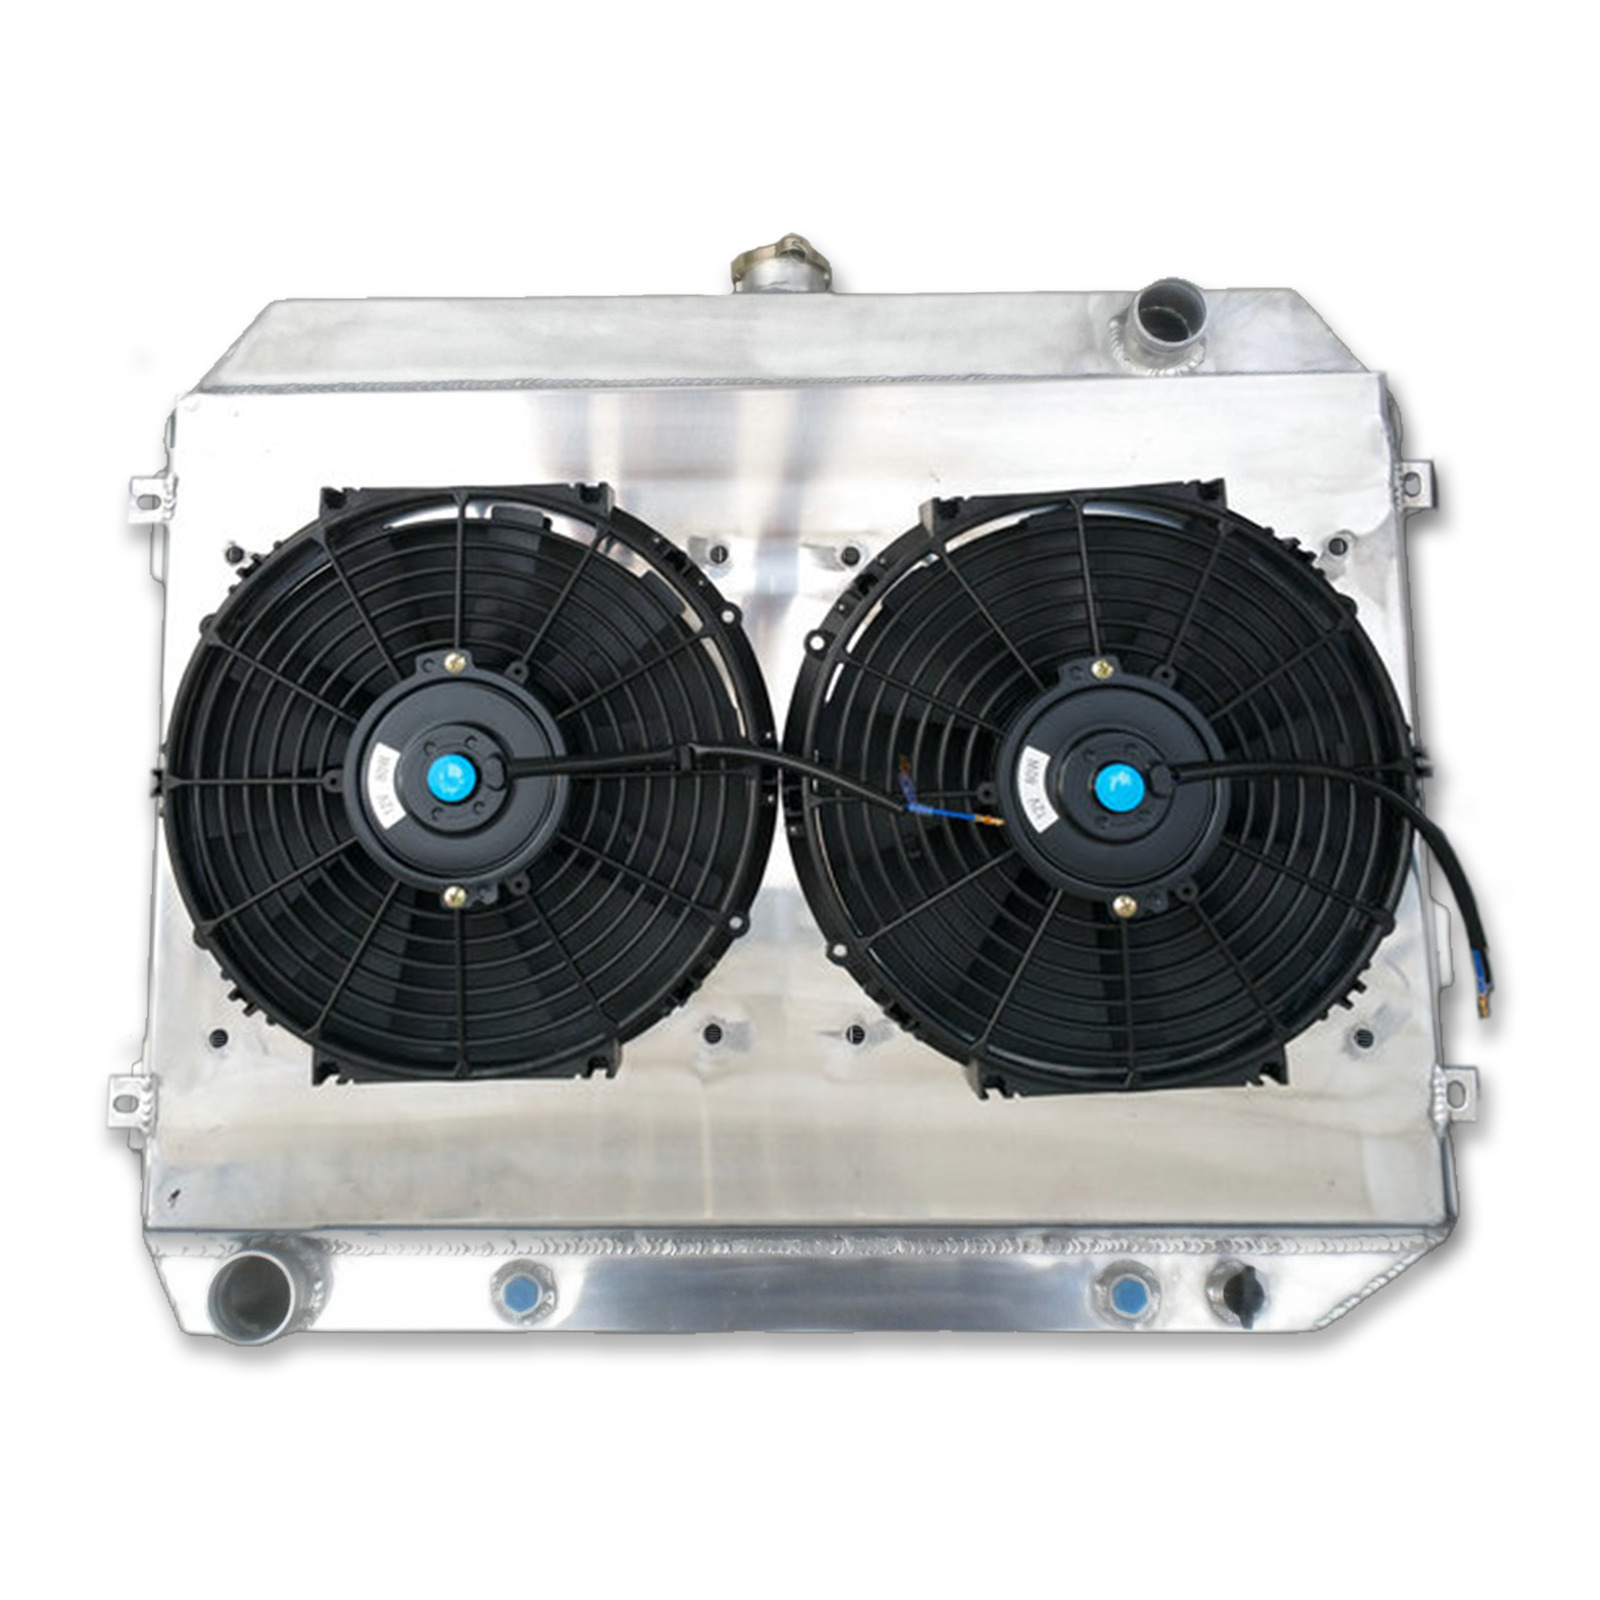 Radiator&Shroud&Fan For Dodge Charger 68-74 /Challenger 70-74/Plymouth GTX 68-72